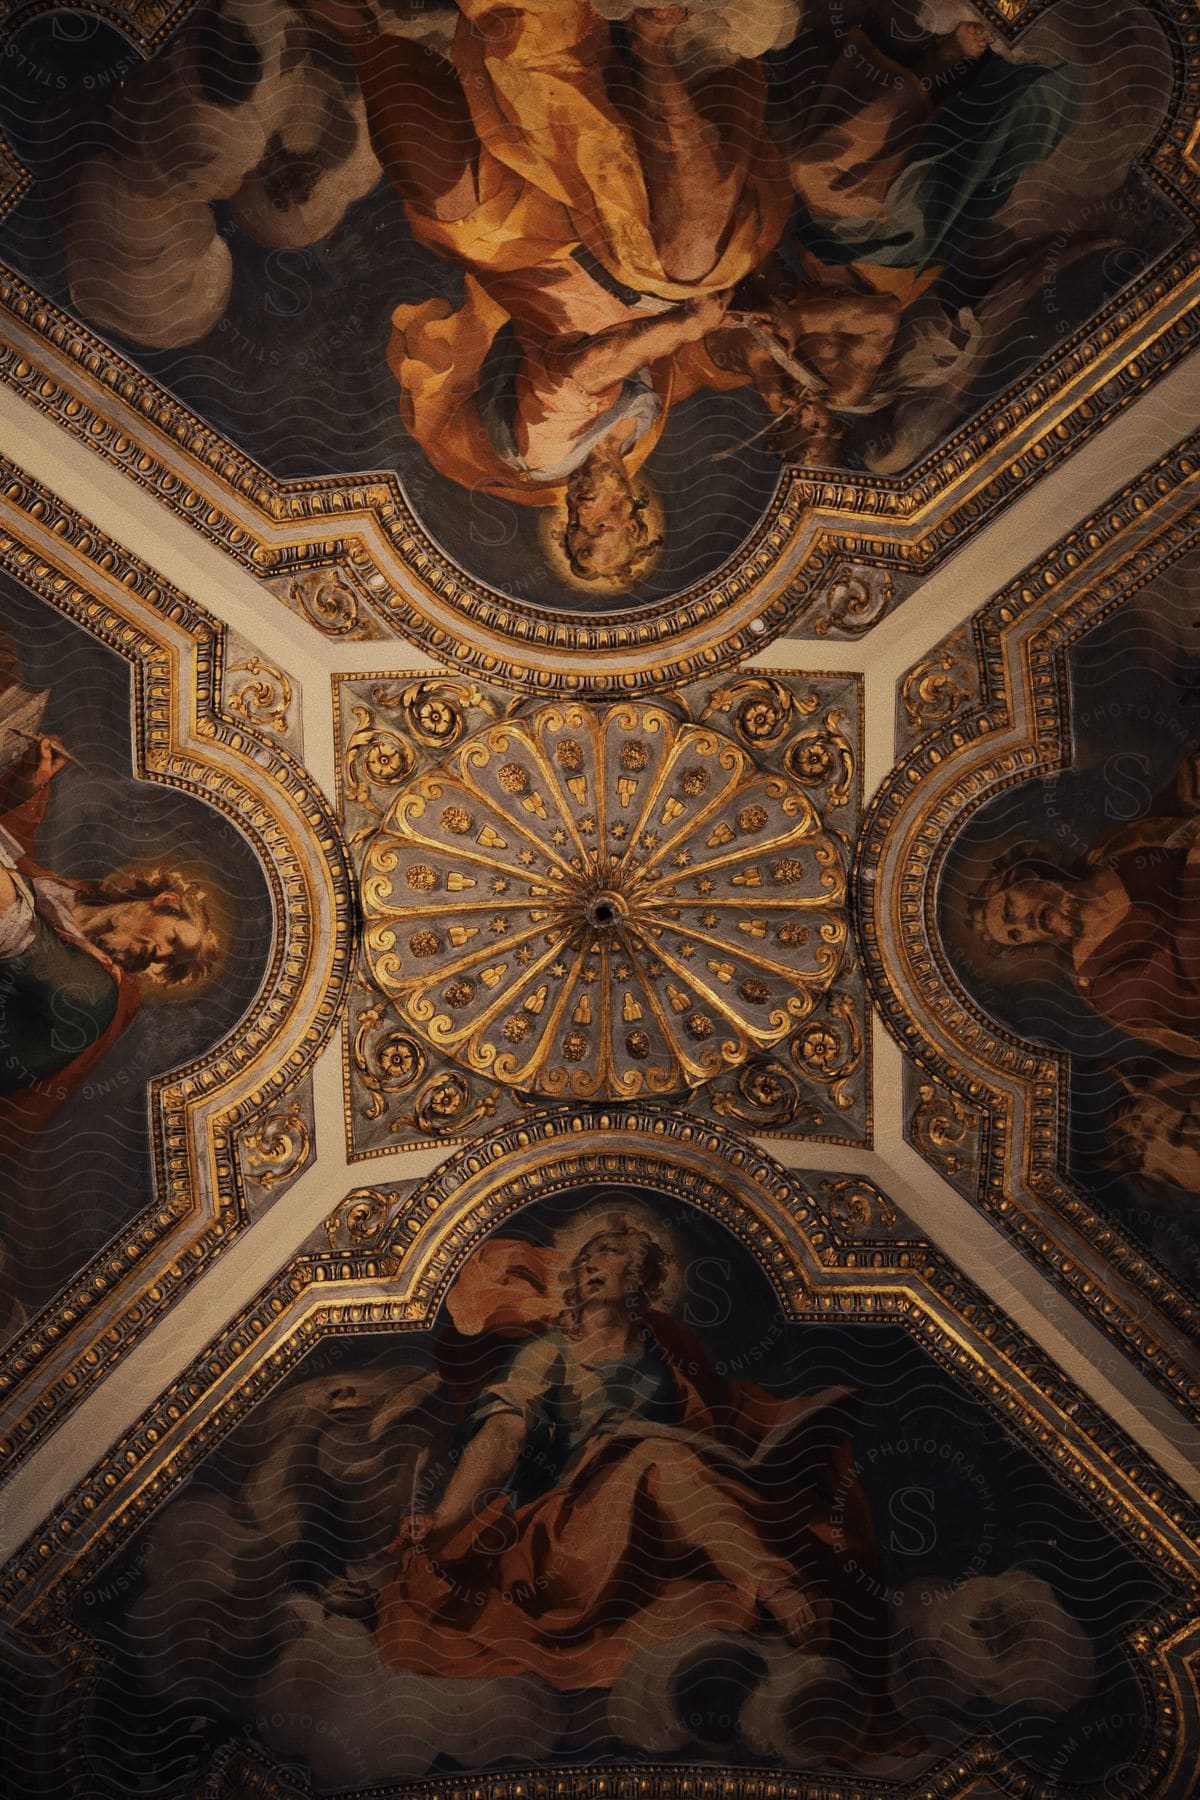 Detailed architecture and paintings on the ceiling of an old Roman church